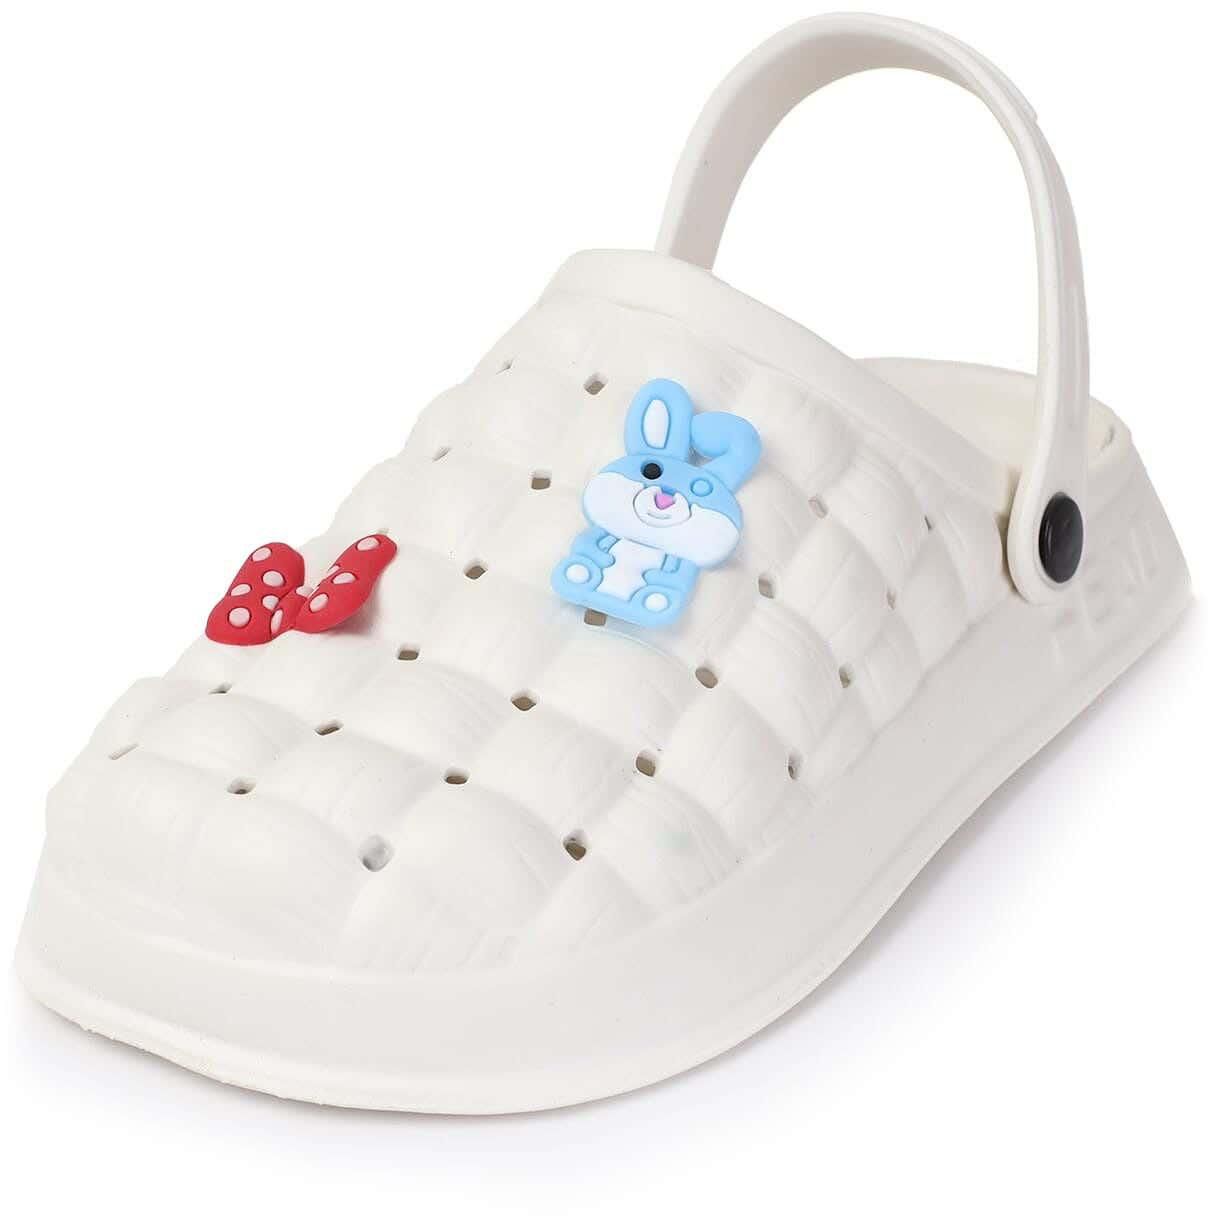 Get Plastic Clog Slippers For Women, 39 EU - White with best offers | Raneen.com